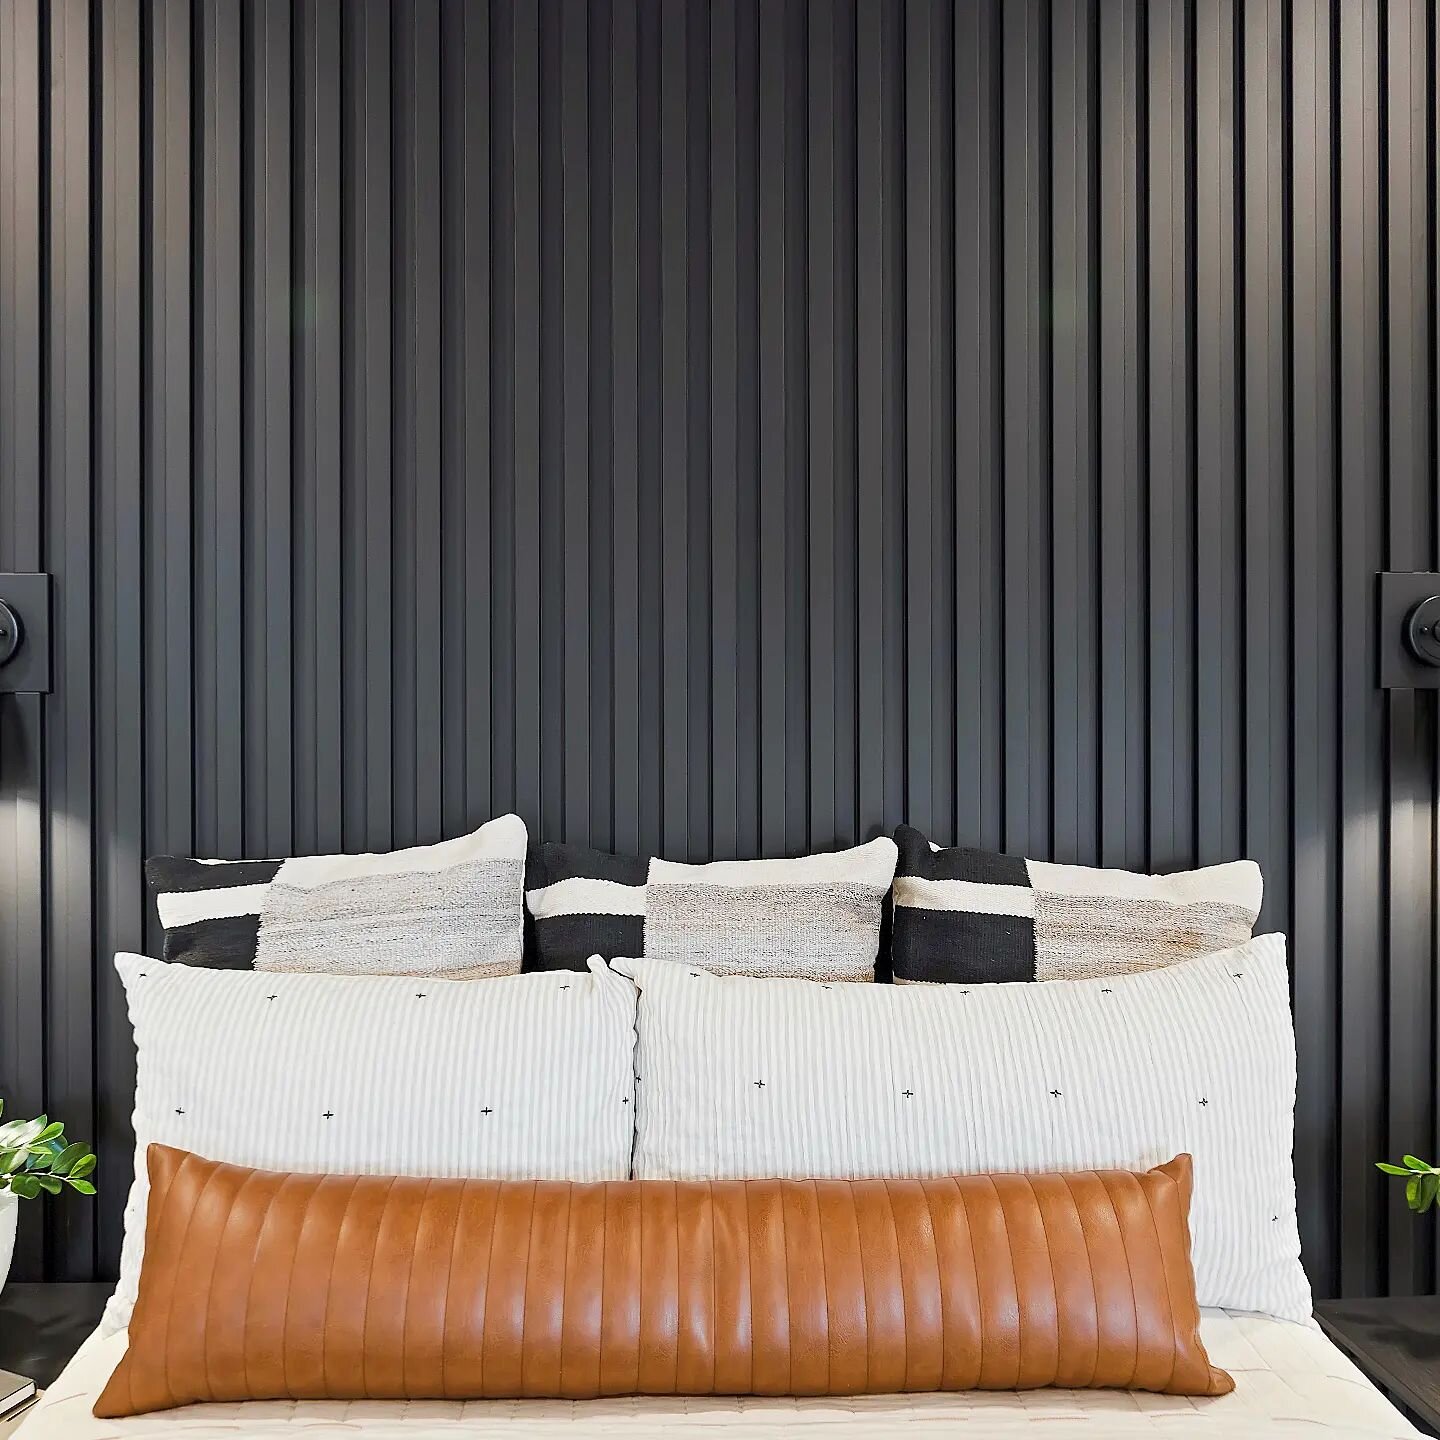 Close up of this beautiful black slat accent wall. 🖤 It's a simple design but adds a ton of character to this room. ✨️
.
.
.
.🔨 Design &amp; Build @customhomesbb
. 🛋 Home Decor @sullivanhomesstaging
. 📷 Photography @sunnyskiesmedia
.
.
.
.
.
#int